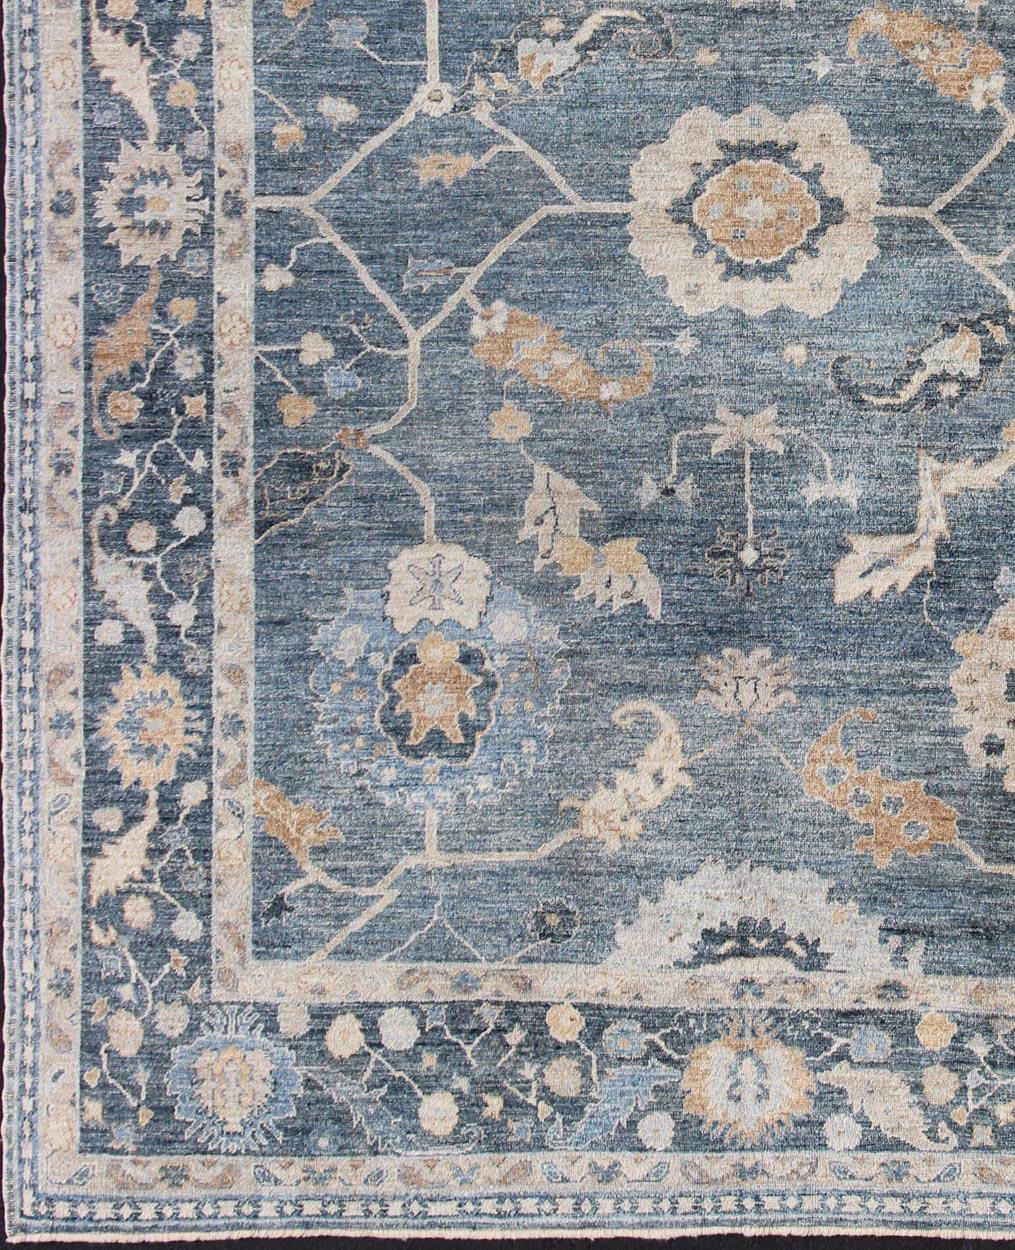 Blue Angora Oushak rug from Turkey, rug an-134596, country of origin / type: Turkey / Angora Oushak.

From our Angora collection, this piece is made with a combination of angora and old wool. Featuring all organic materials, the Angora collection is